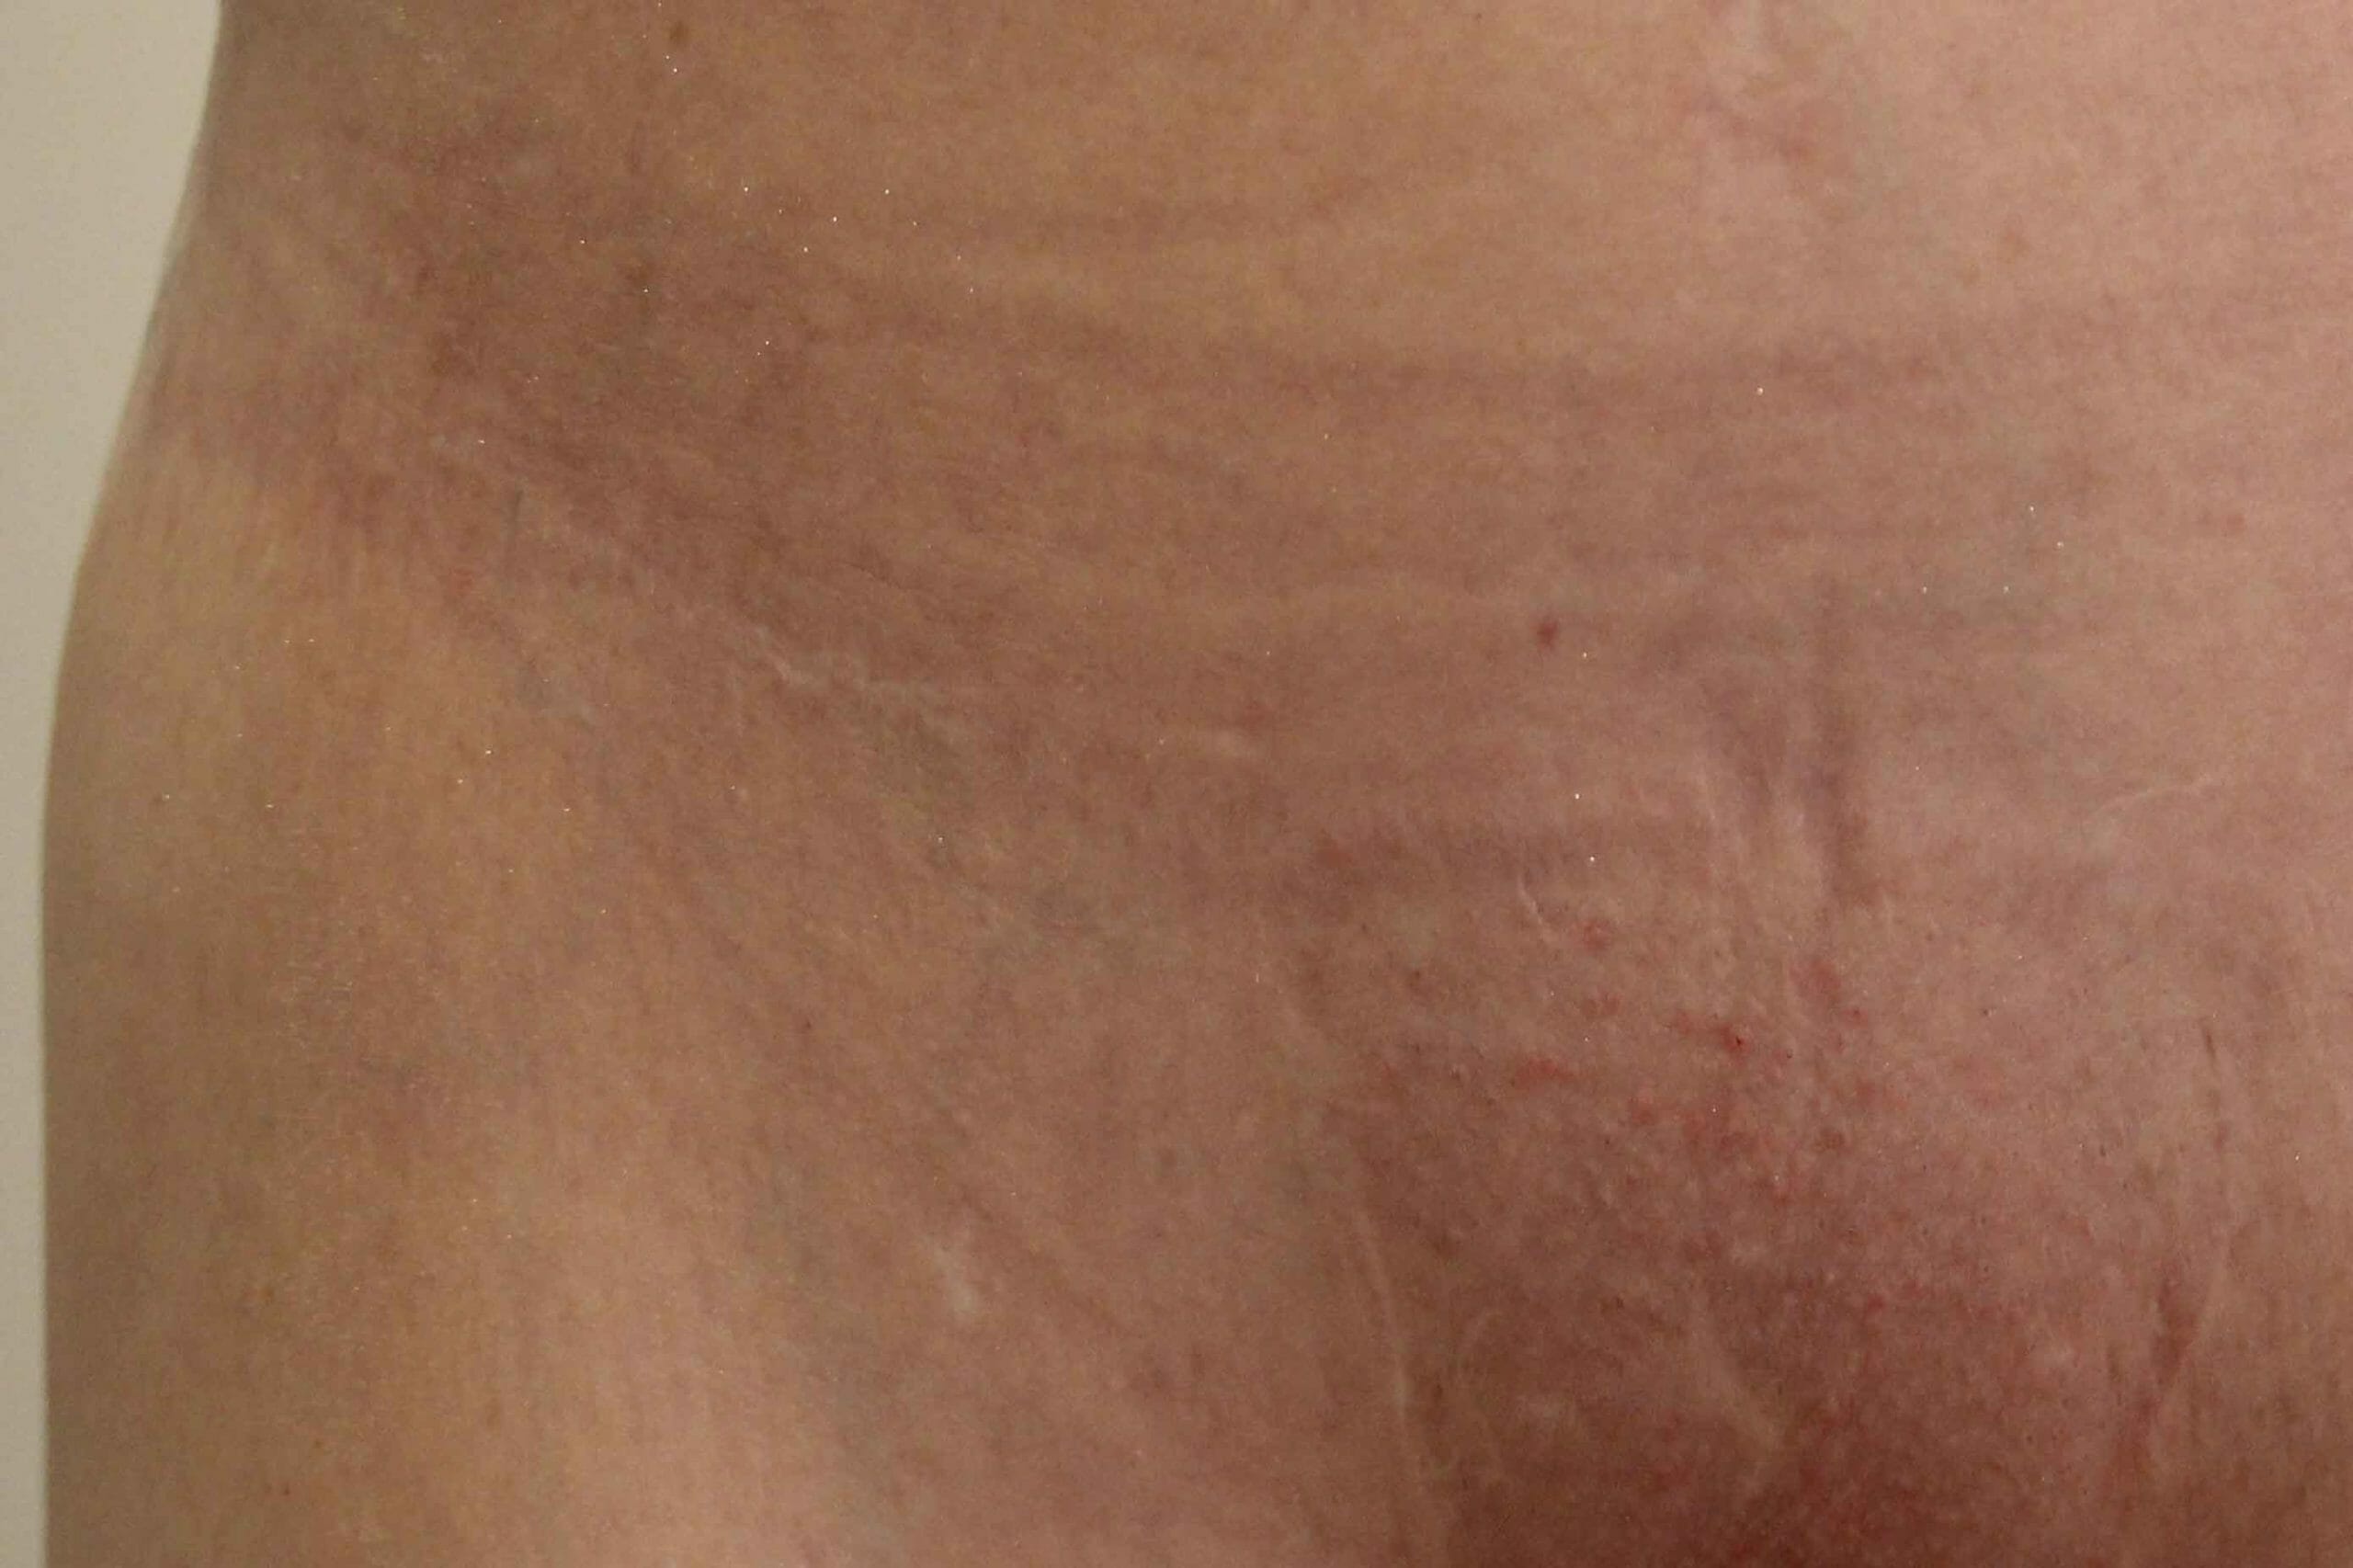 Scar Camouflage Tattoo Before and After  Ruth Swissa